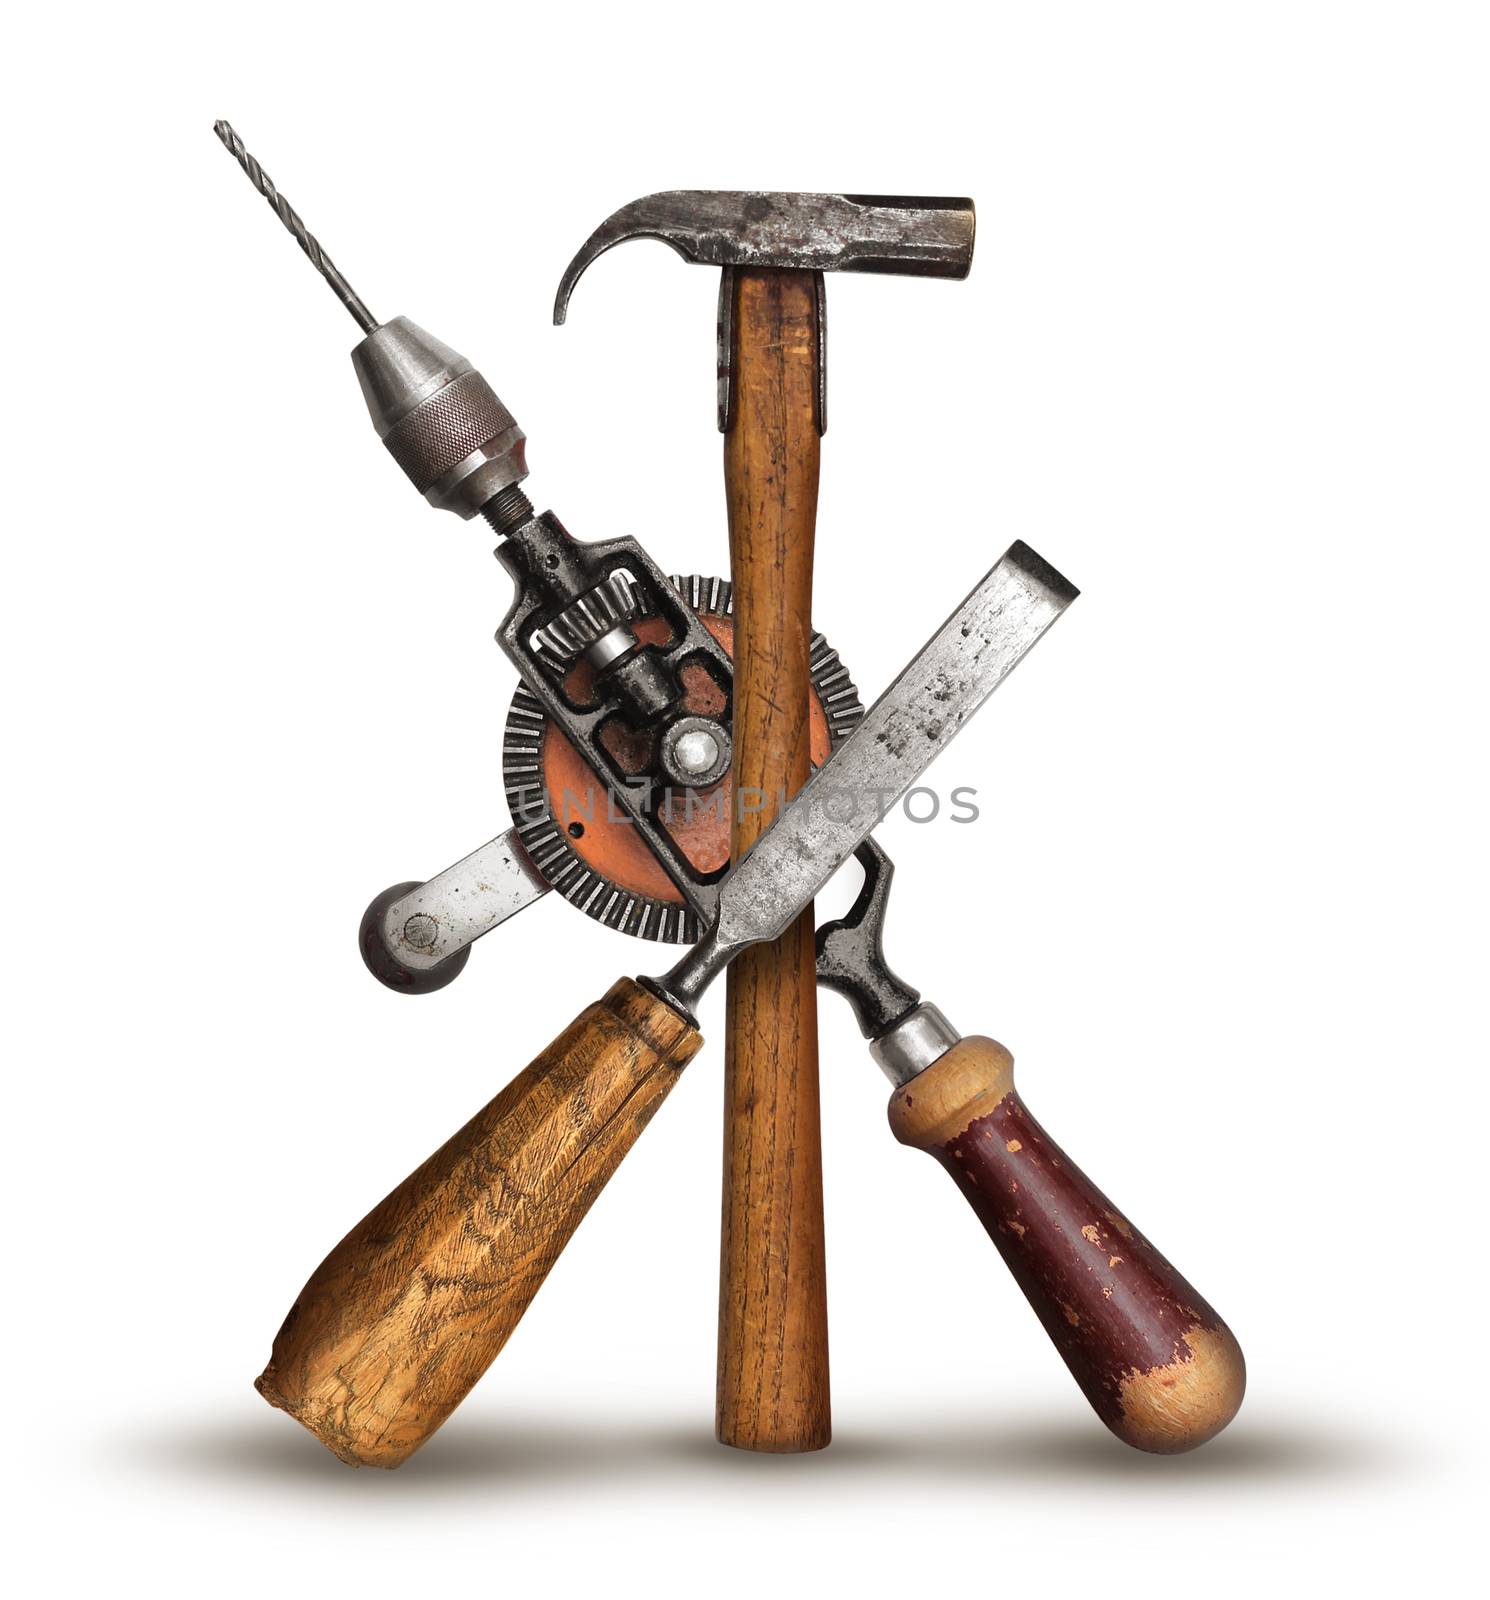 Realistic DIY old carpenter hand tools crossed for get the job done service concept, isolated on white background